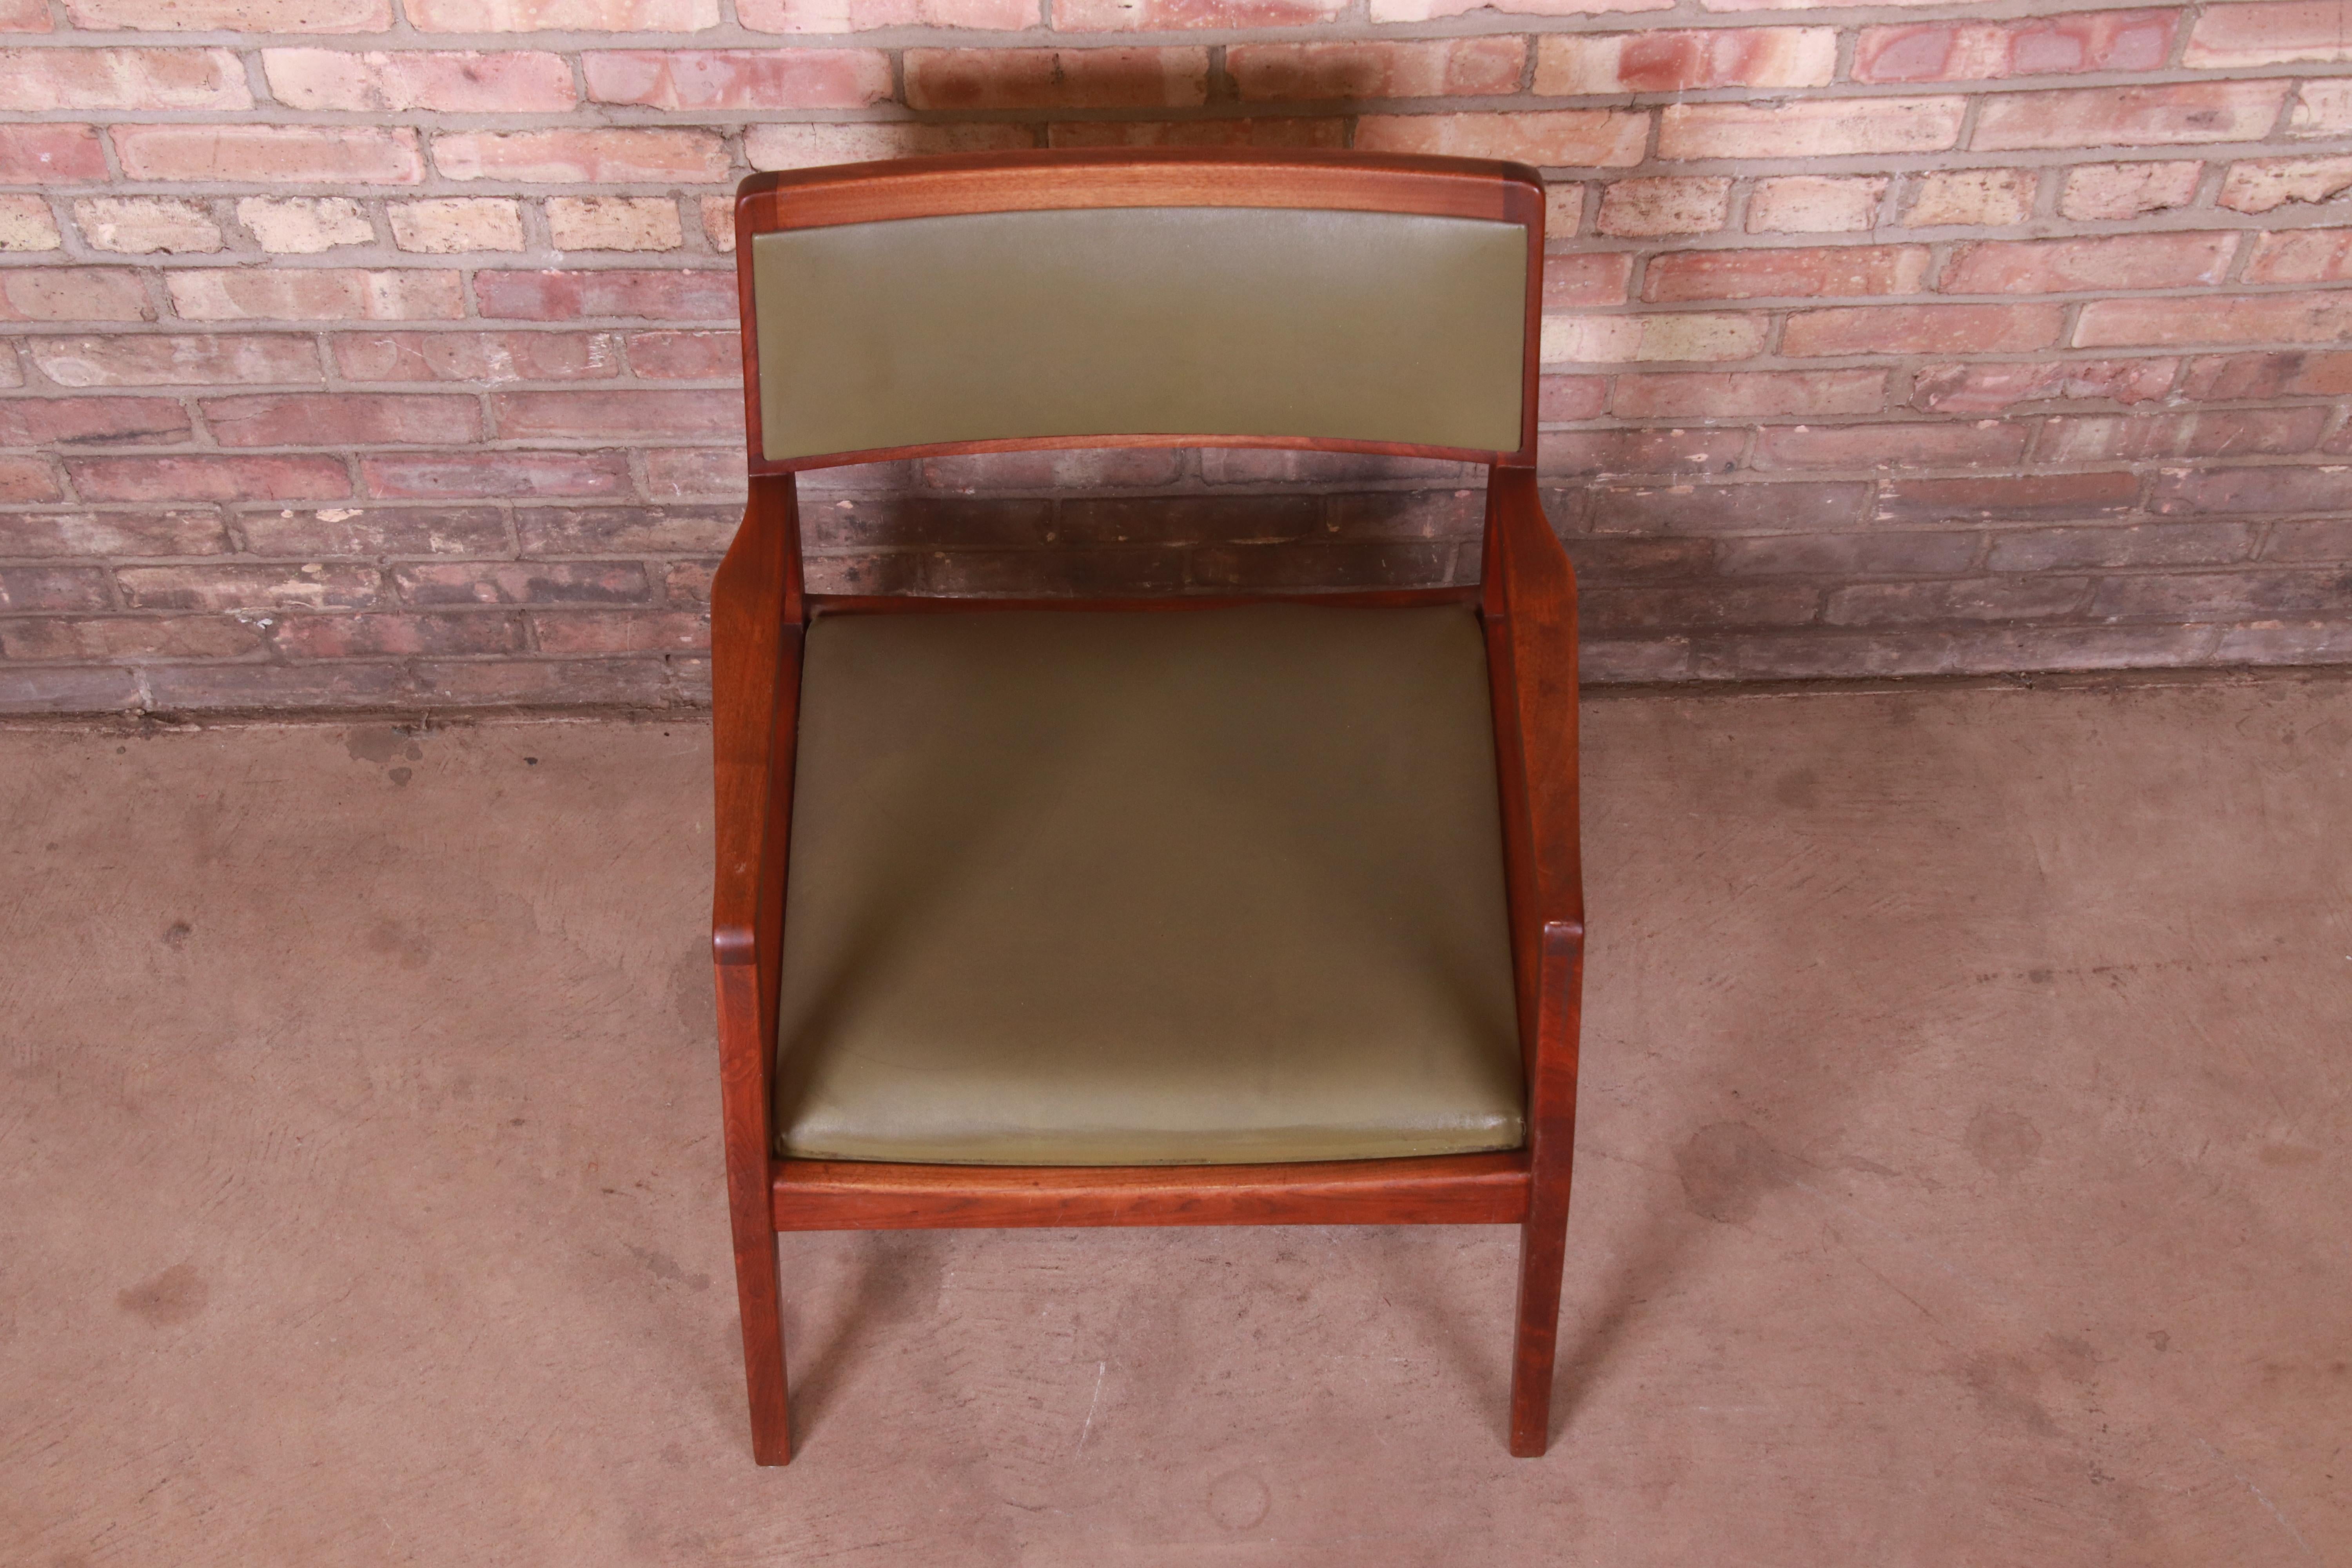 Jens Risom Mid-Century Modern Sculpted Walnut Playboy Lounge Chair, 1960s For Sale 1